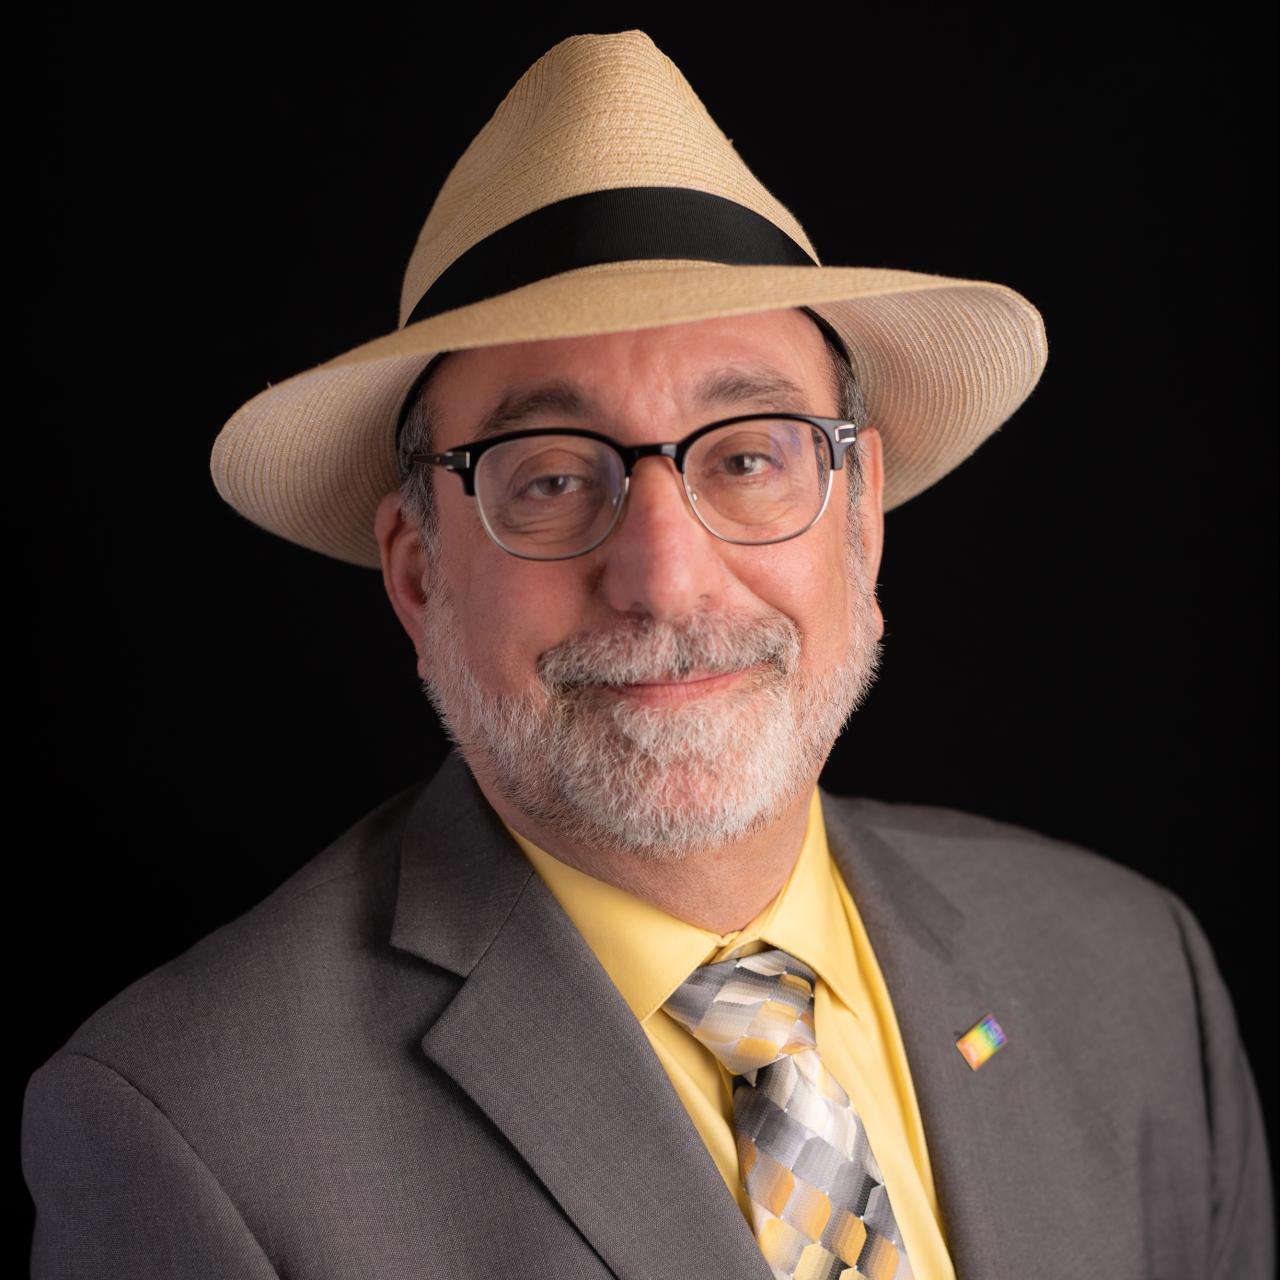 Headshot of Scott Lissner, wearing panama fedora hat, glasses, and a grey suit and 